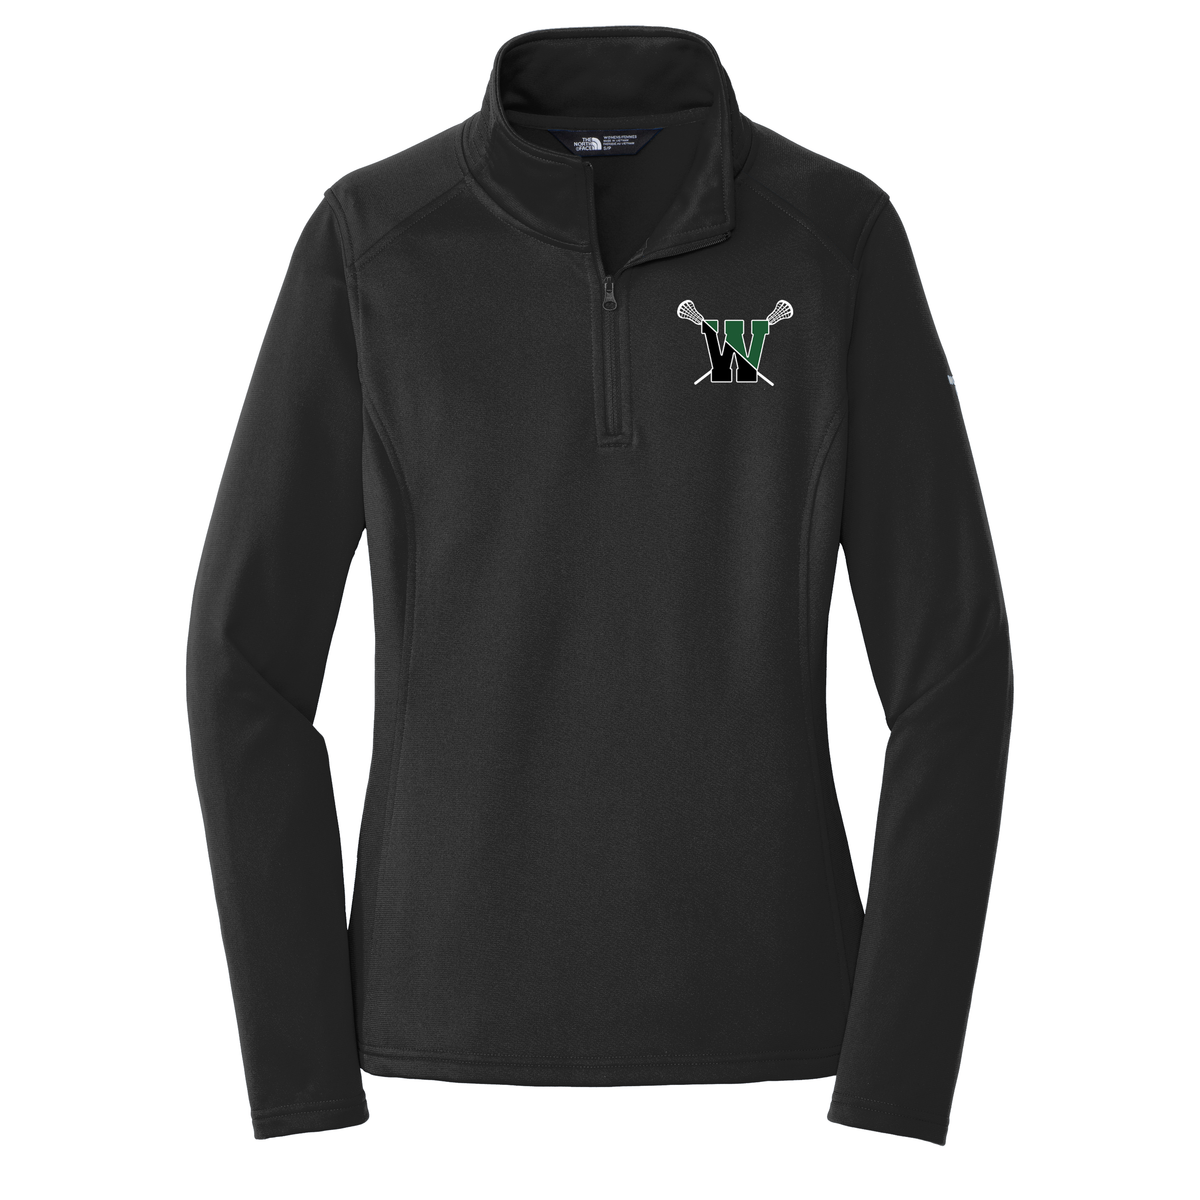 Westwood Girls Lax The North Face Ladies Tech 1/4 Zip